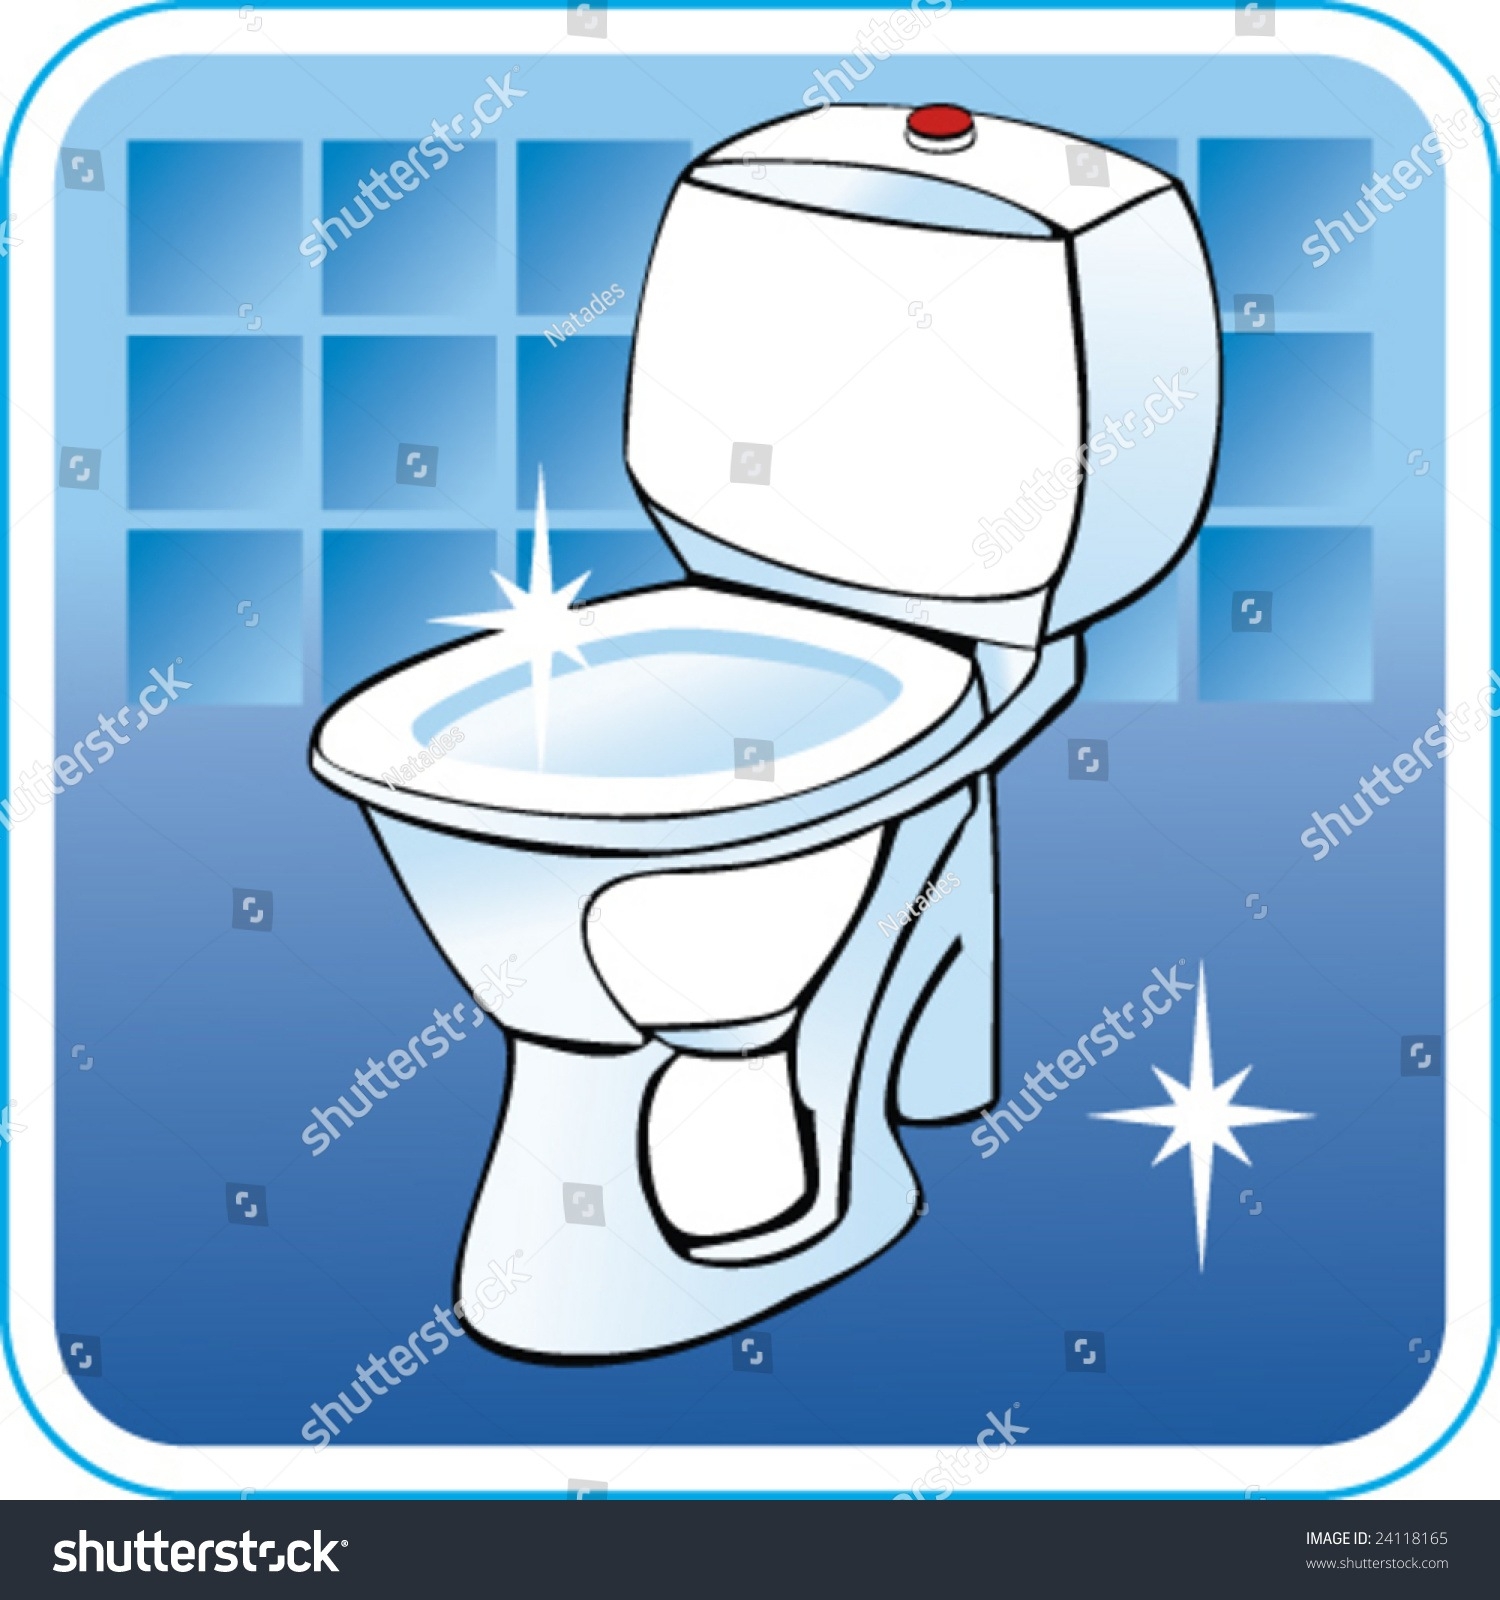 Clean letters pencil and. Bathroom clipart toilet